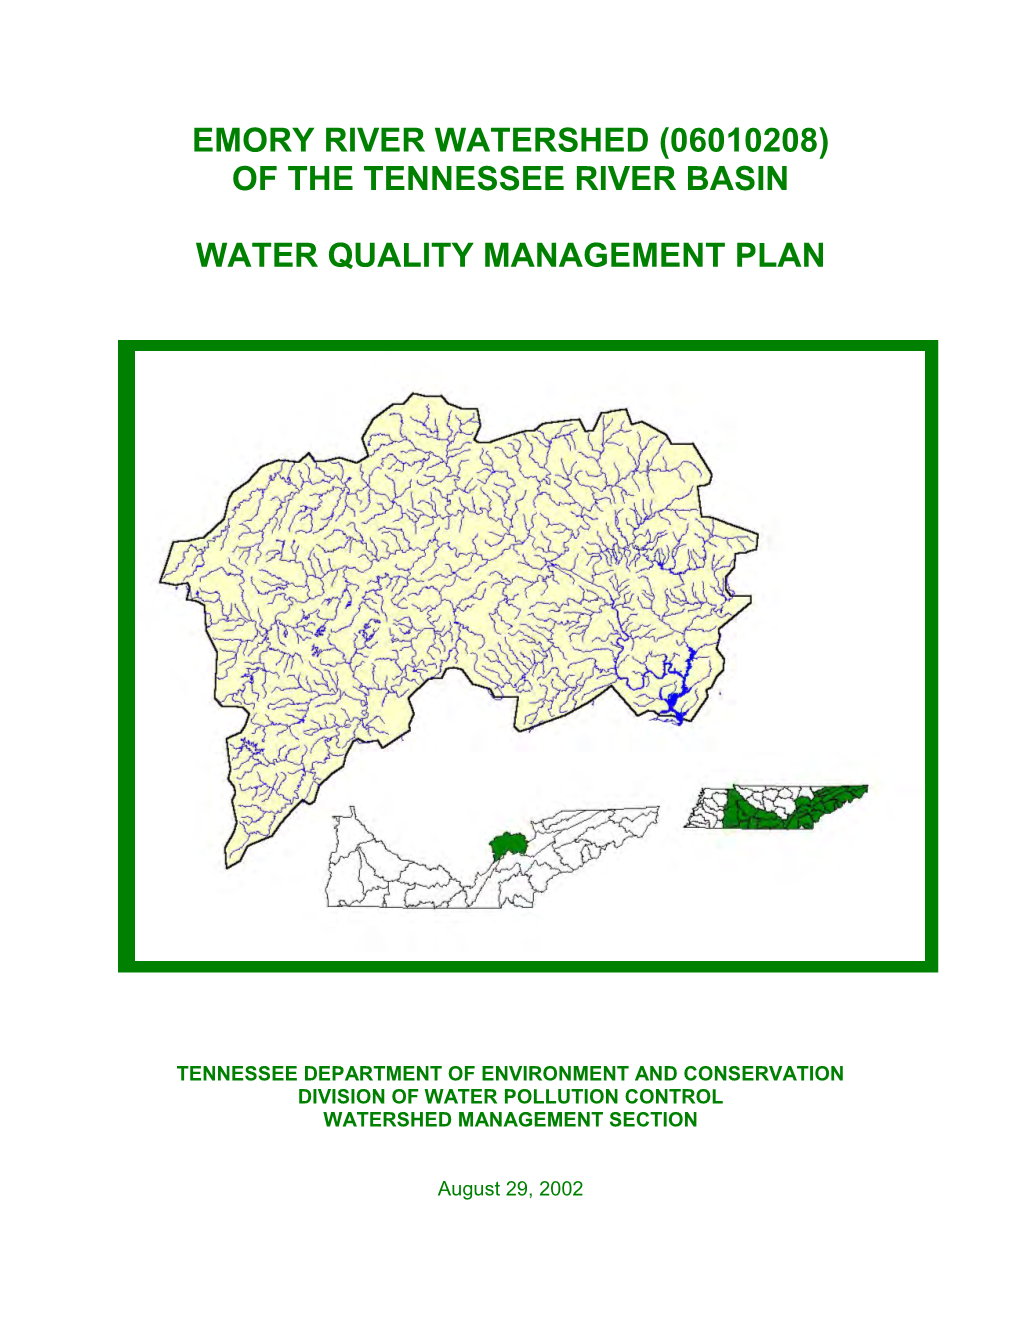 Emory River Watershed (06010208) of the Tennessee River Basin